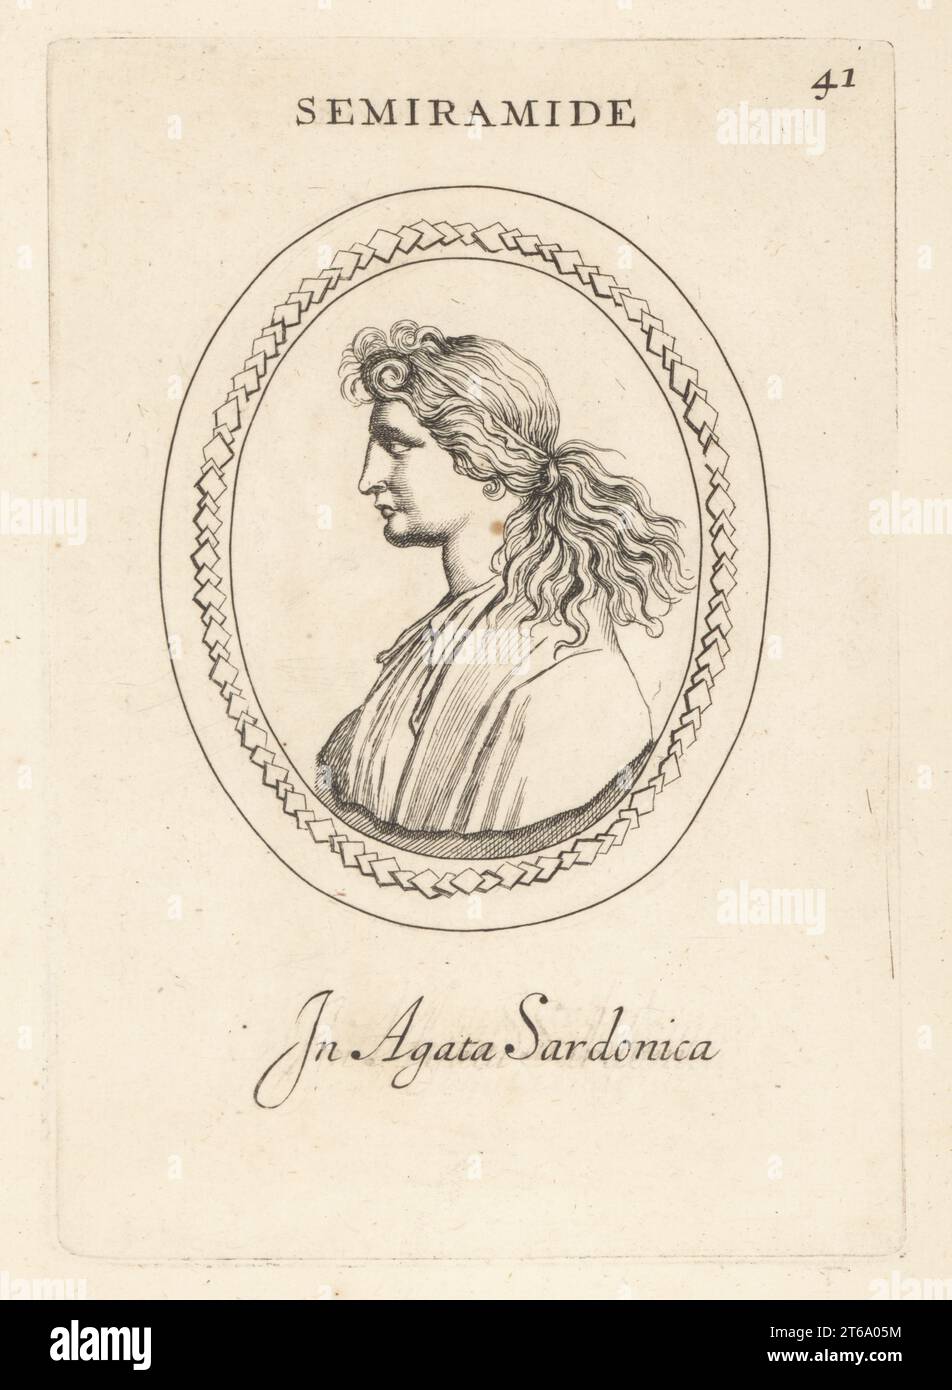 Bust profile of Semiramis, the semi-legendary Lydian-Babylonian wife of general Onnes and Ninus, founder of Nineveh, later warrior queen of Assyria. Shammuramat. With wild uncombed hair and a manly face. In Sardinian agate. Semiramide in agata Sardonica. Copperplate engraving by Giovanni Battista Galestruzzi after Leonardo Agostini from Gemmae et Sculpturae Antiquae Depicti ab Leonardo Augustino Senesi, Abraham Blooteling, Amsterdam, 1685. Stock Photo